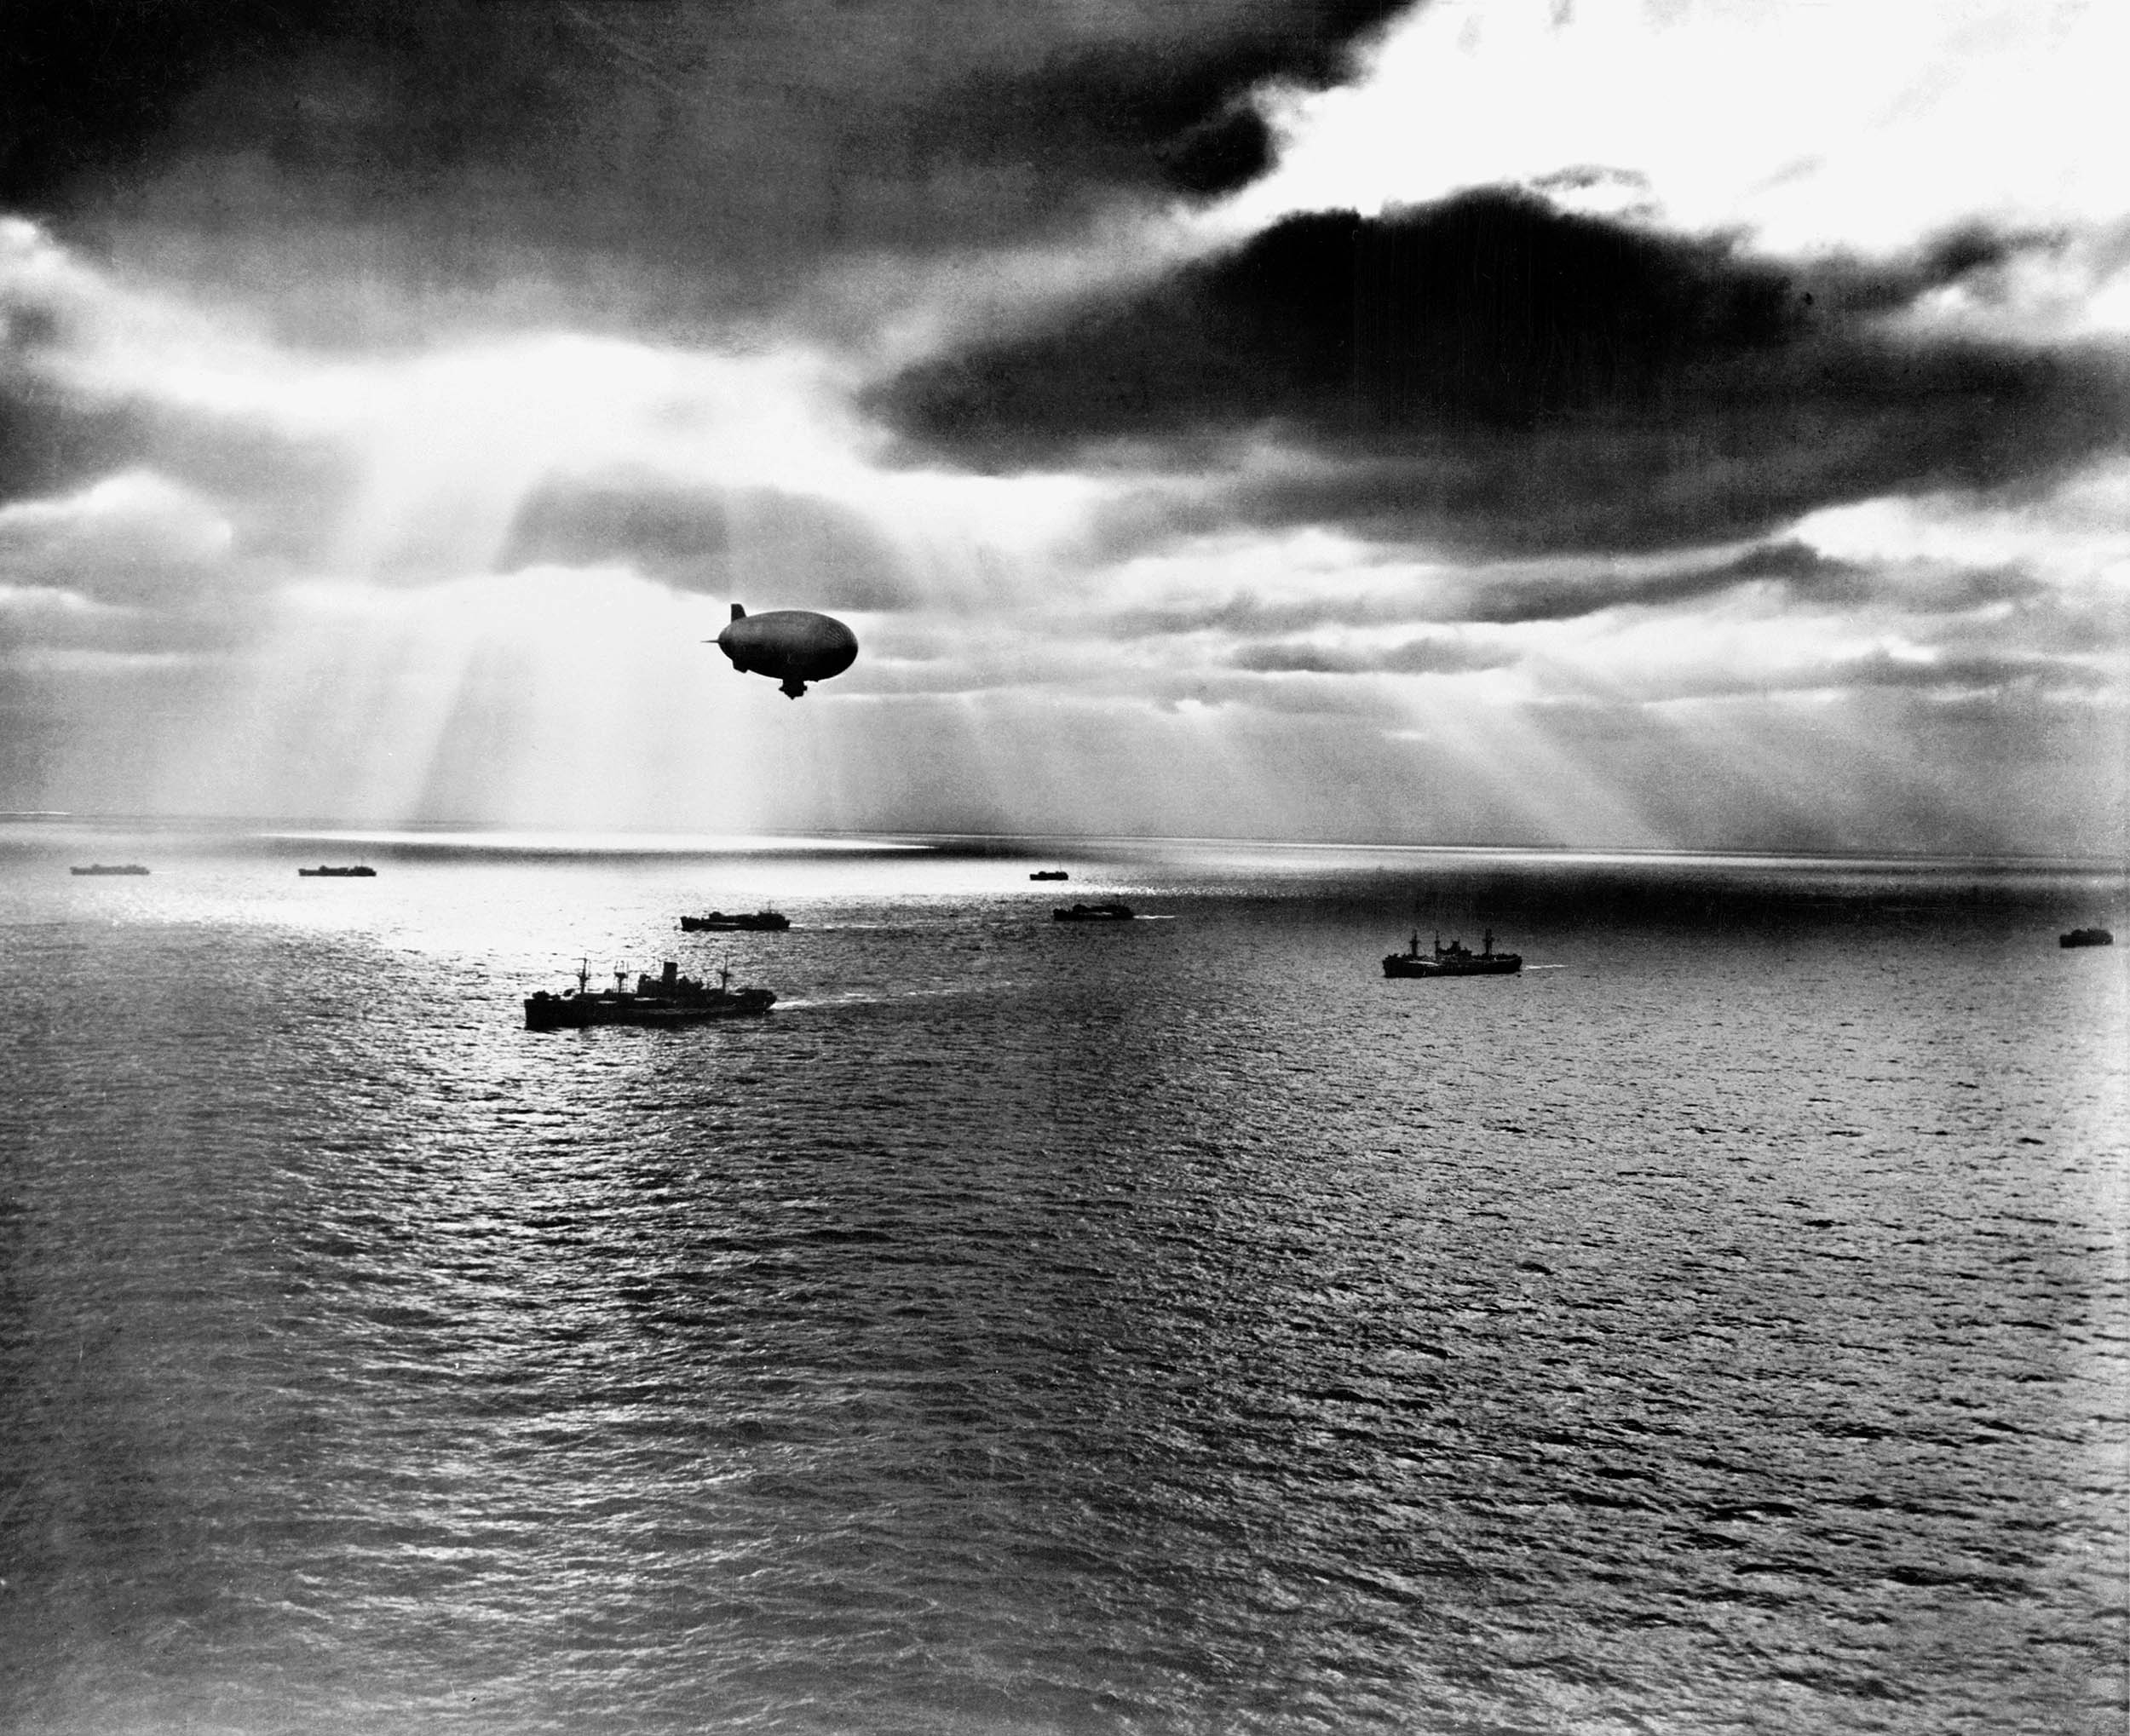 Allied convoy in Atlantic Ocean moves toward its destination while Navy K-class lighter-than-air aircraft hovers overhead, watching for enemy
U-Boats, June 1943 (National Museum of the U.S. Navy)